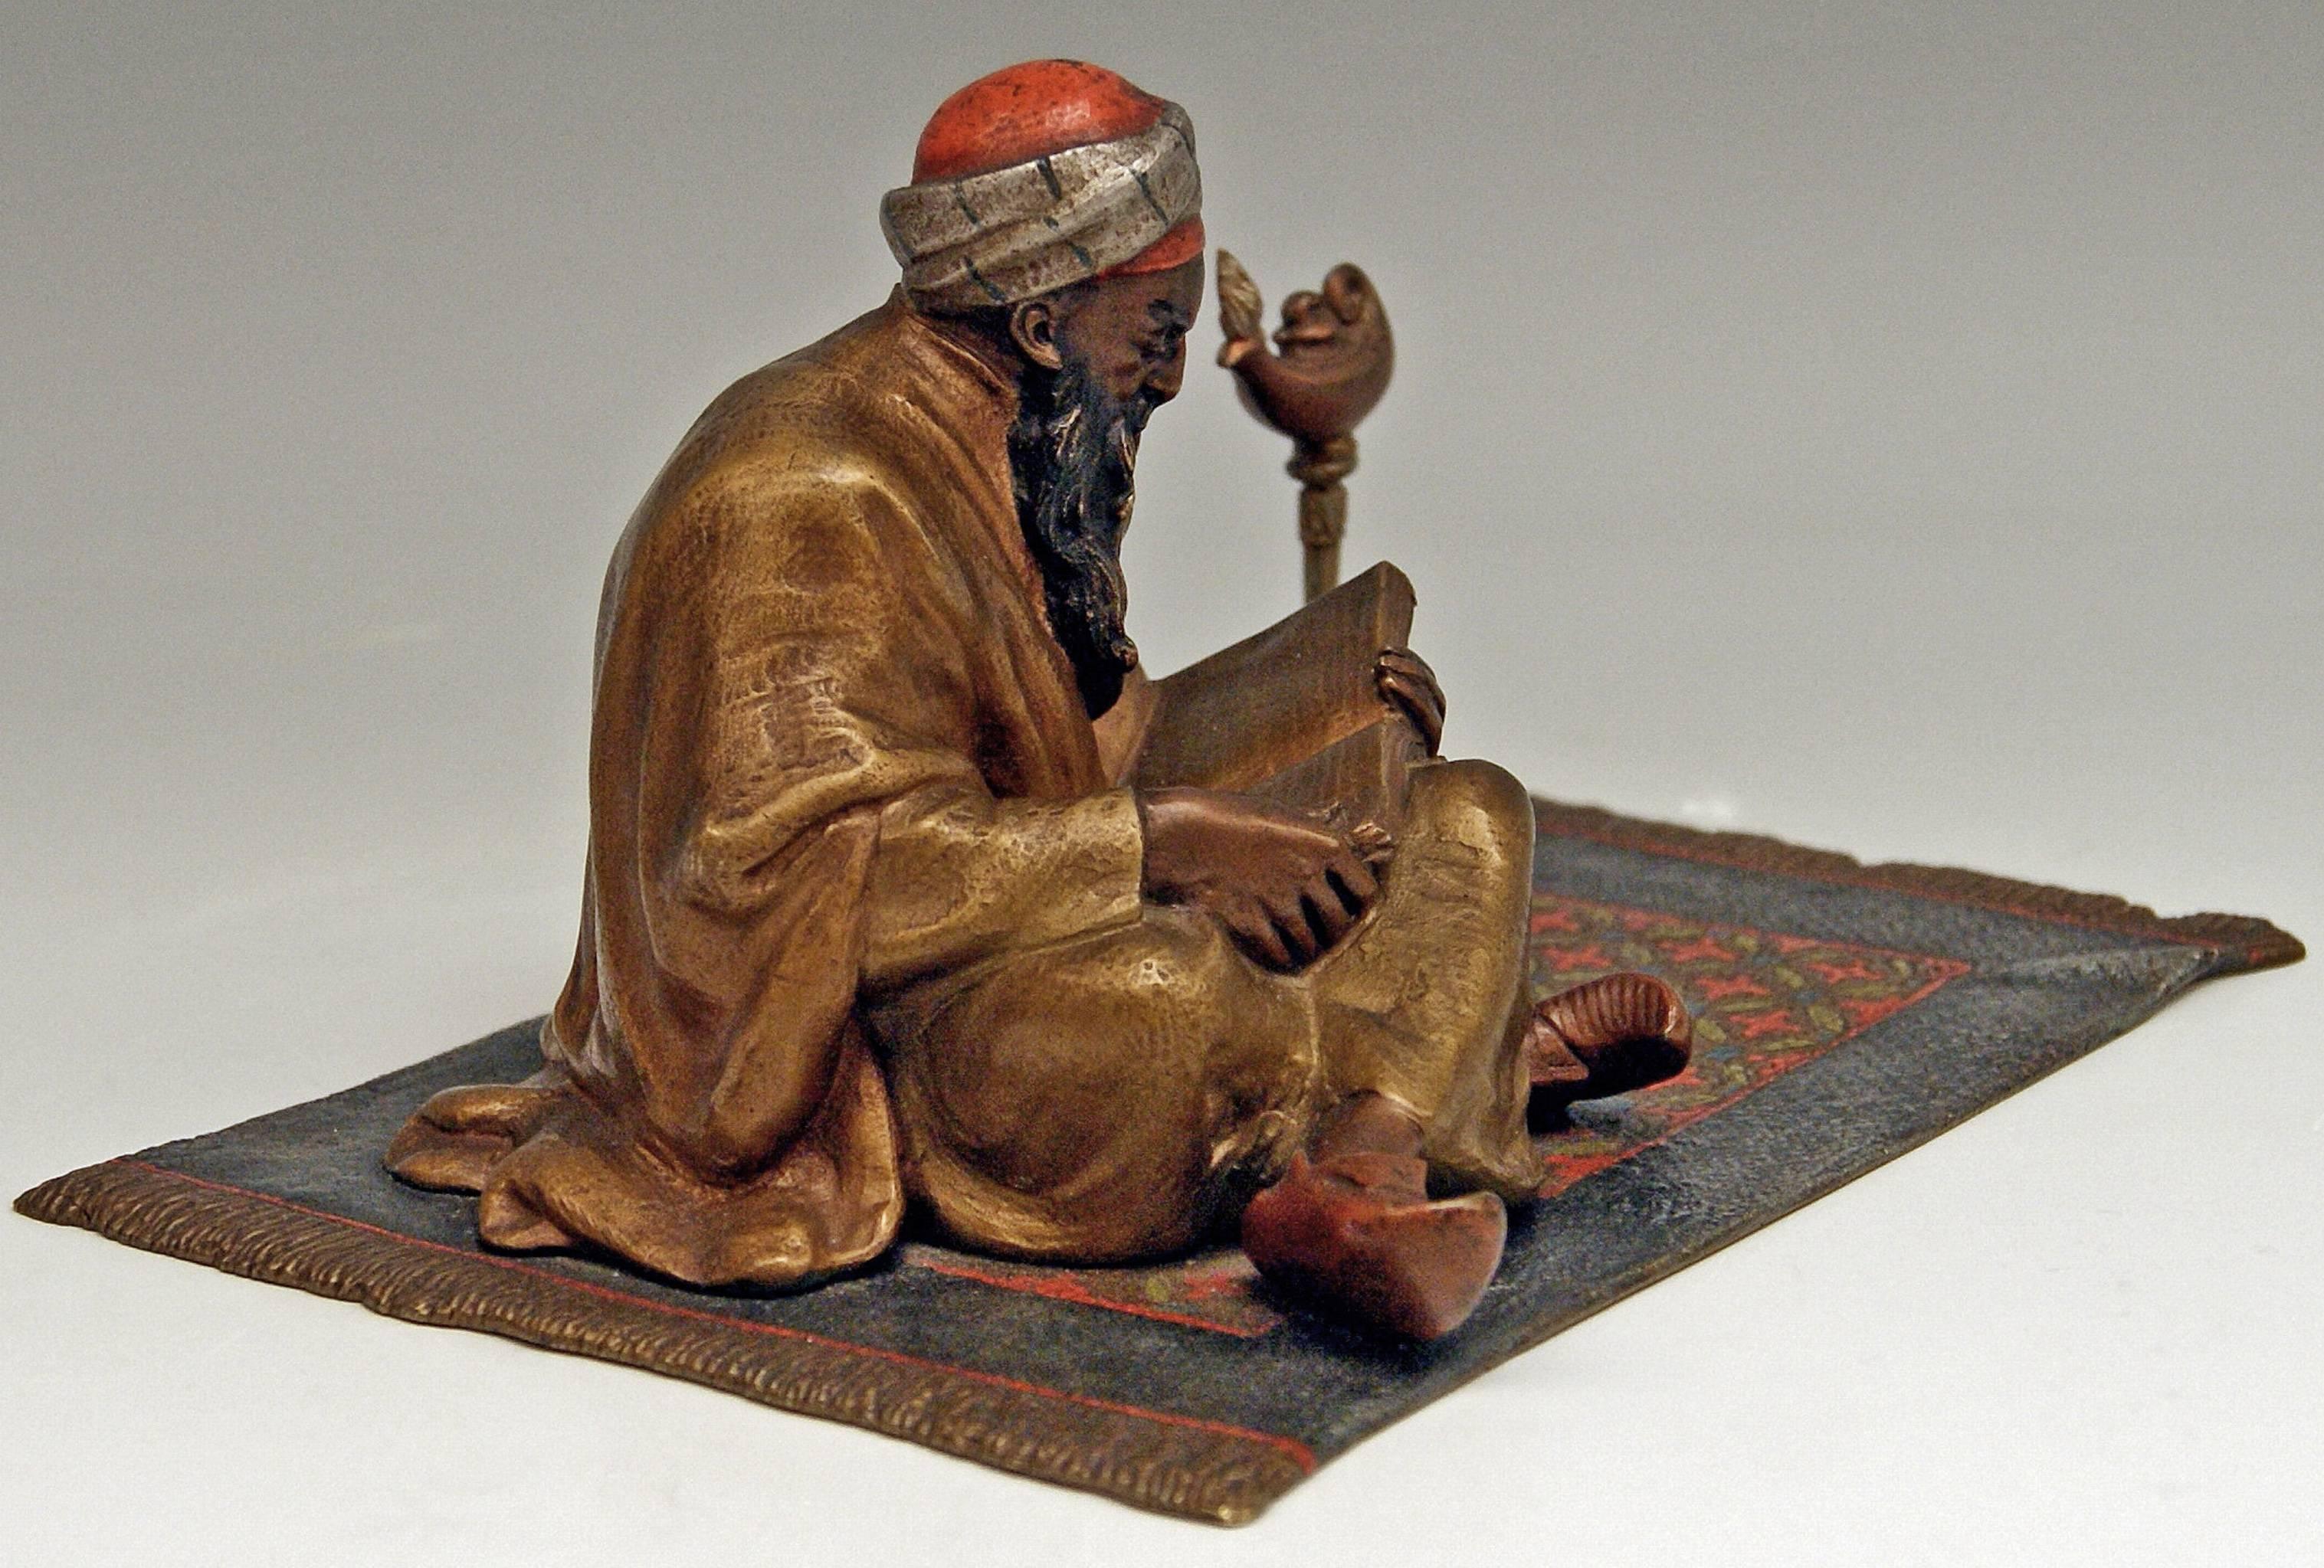 Stunning heavy bronze item: Arab man clad in long mantel situated on carpet 
(Please note: It is a quite large figurine !)

An Arab man wearing a turban is busy with reading a book: 
The old bearded man sits on carpet with crossed legs and holds